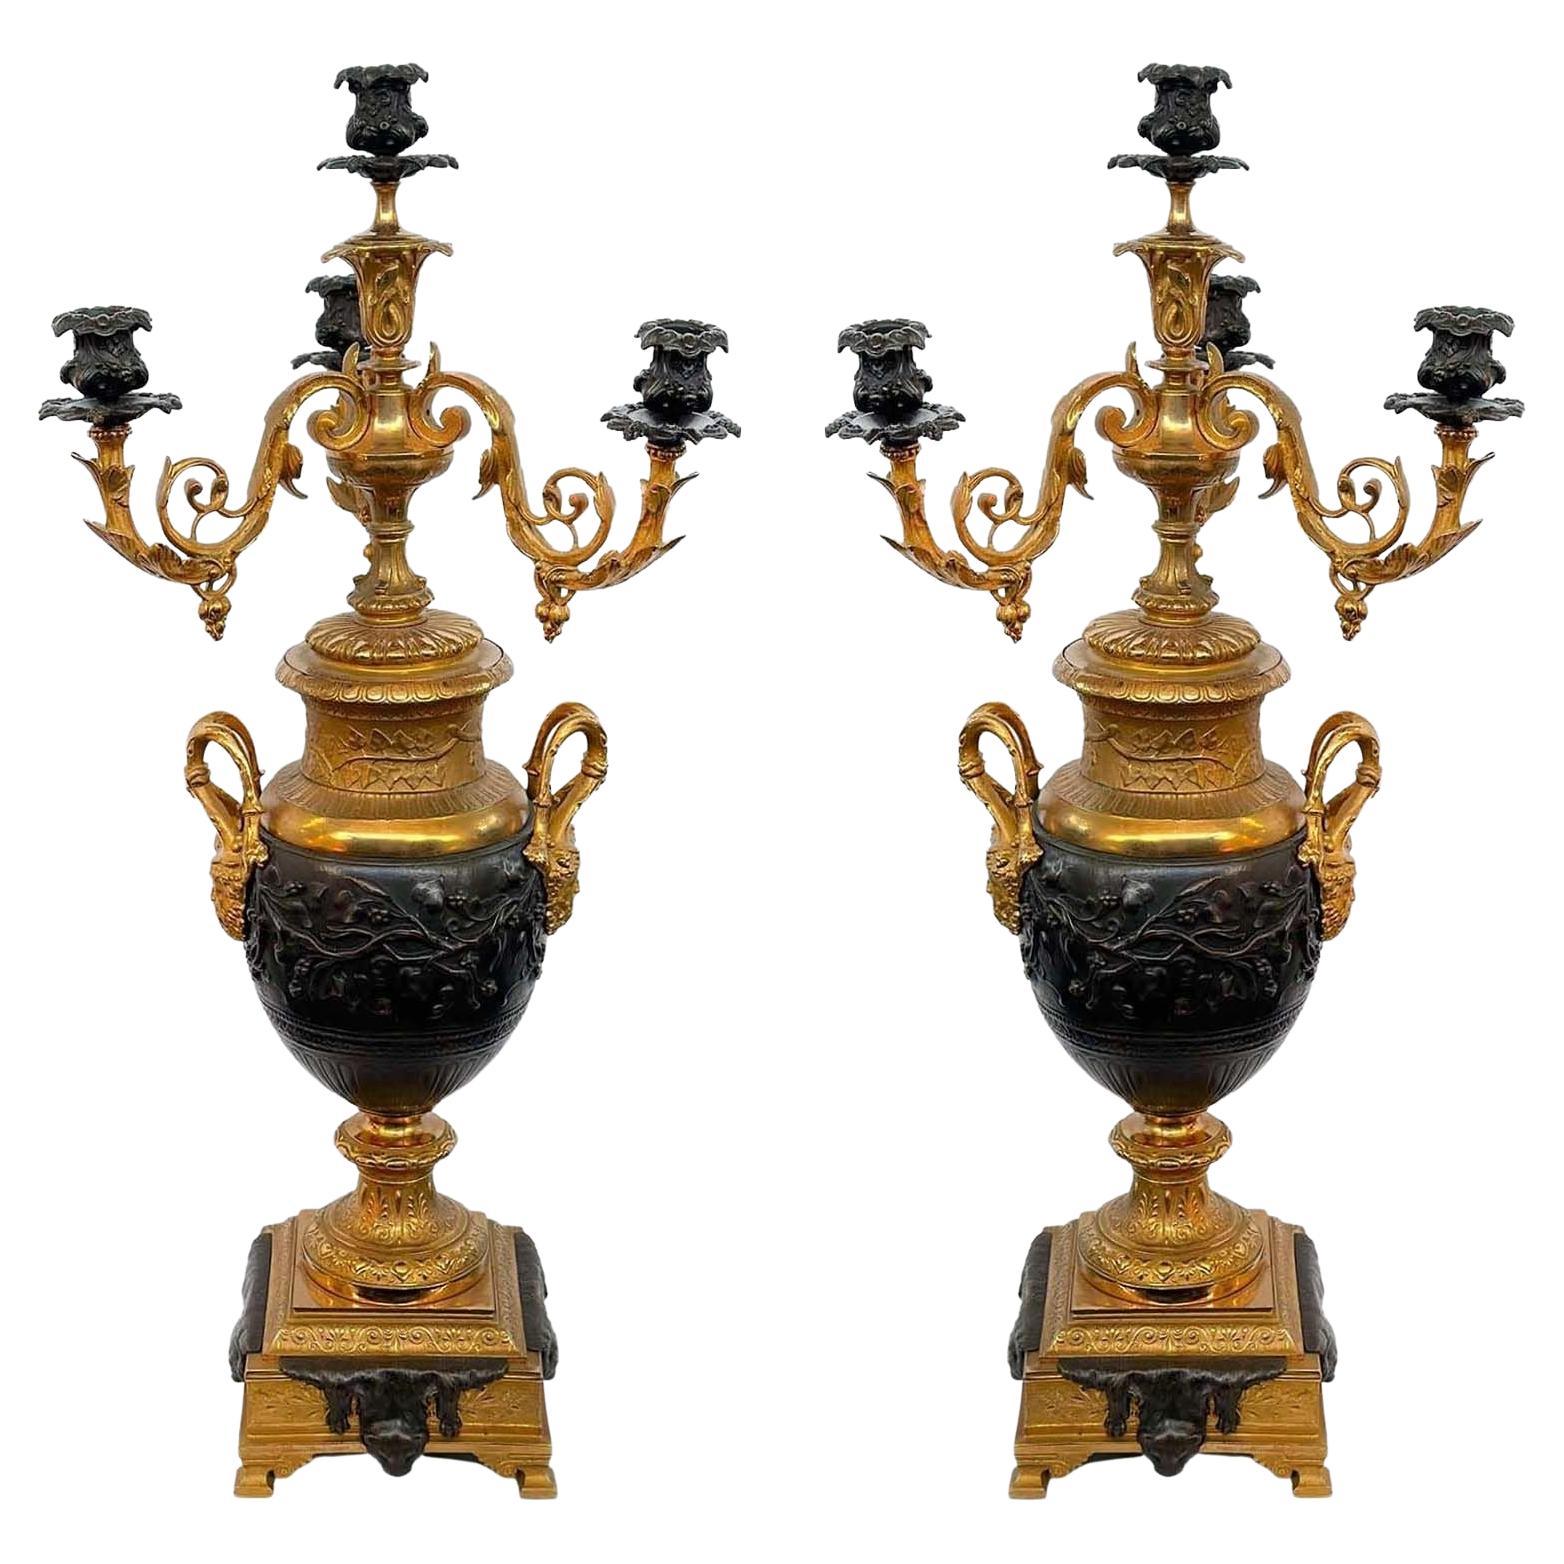 Pair of Late 19th Century Napoleon III Gilt & Patinated Bronze Candelabras For Sale